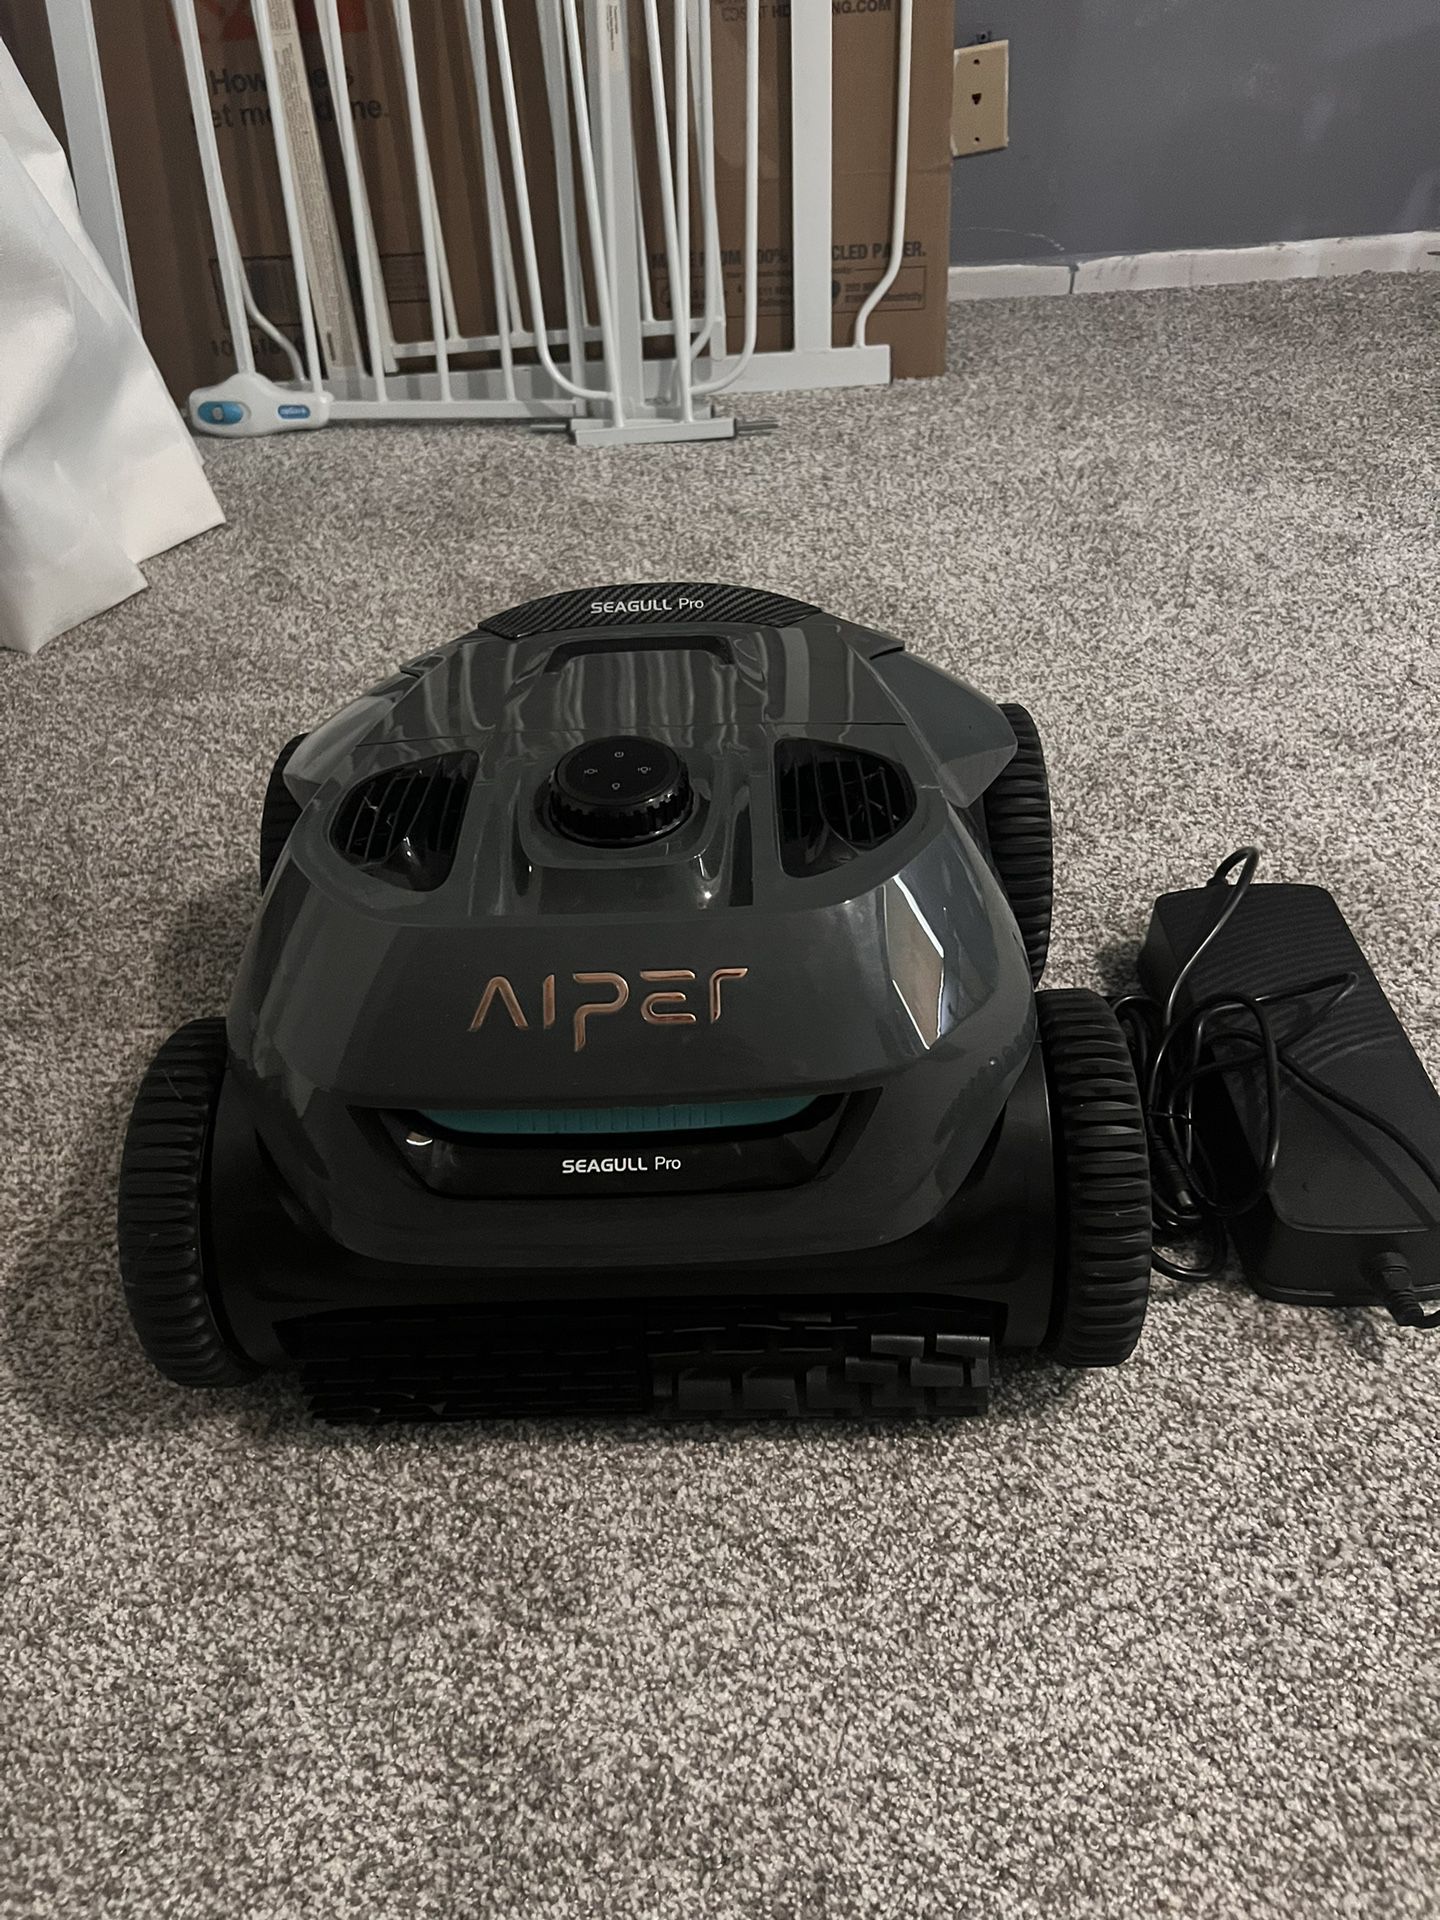 Viper Automatic Pool Cleaner